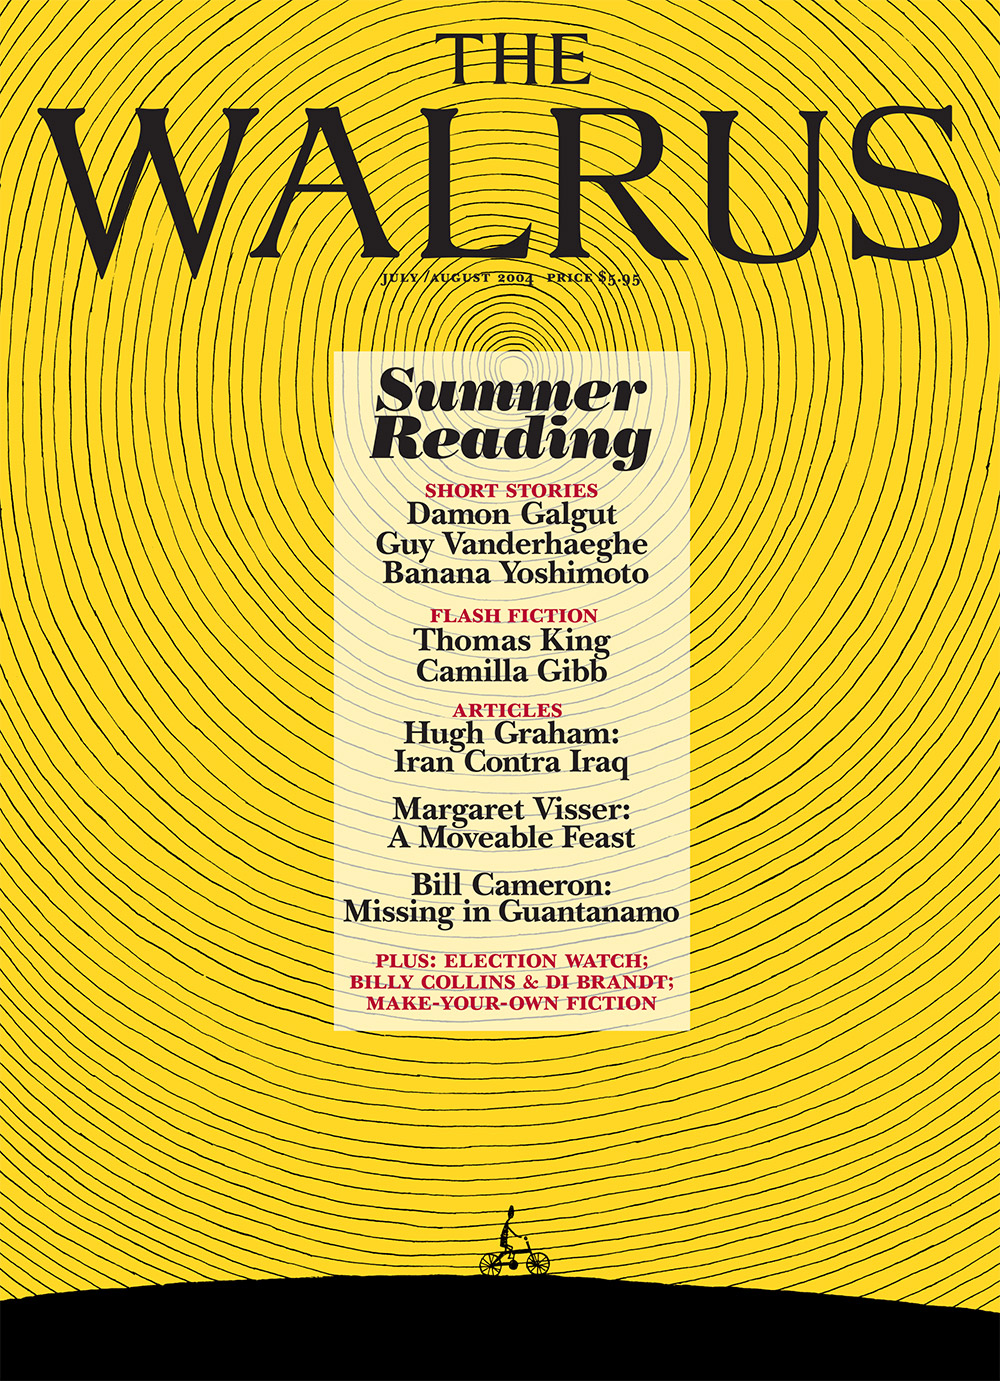 Cover of The Walrus magazine featuring a line drawing of a small bike-riding figure at the bottom with circular radiating black lines indicating a sun on top of a yellow background. The Walrus wordmark is in black at the top and the main headline reads 'Summer Reading.'